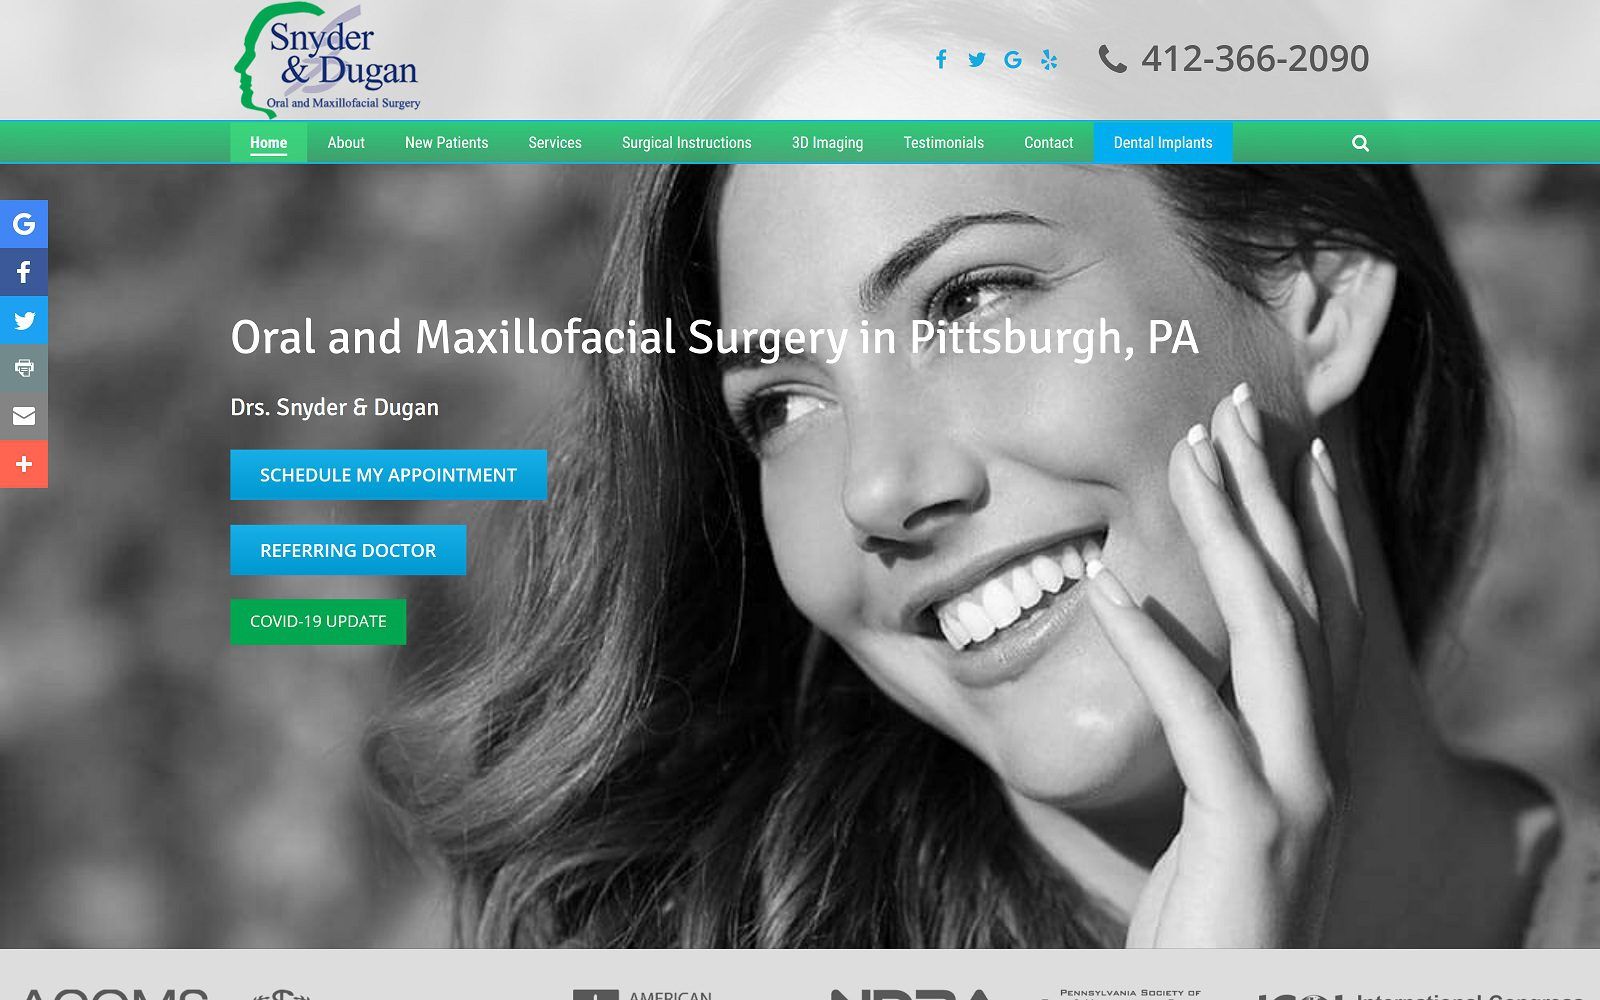 The screenshot of snyder & dugan oral maxillofacial and implant surgery website